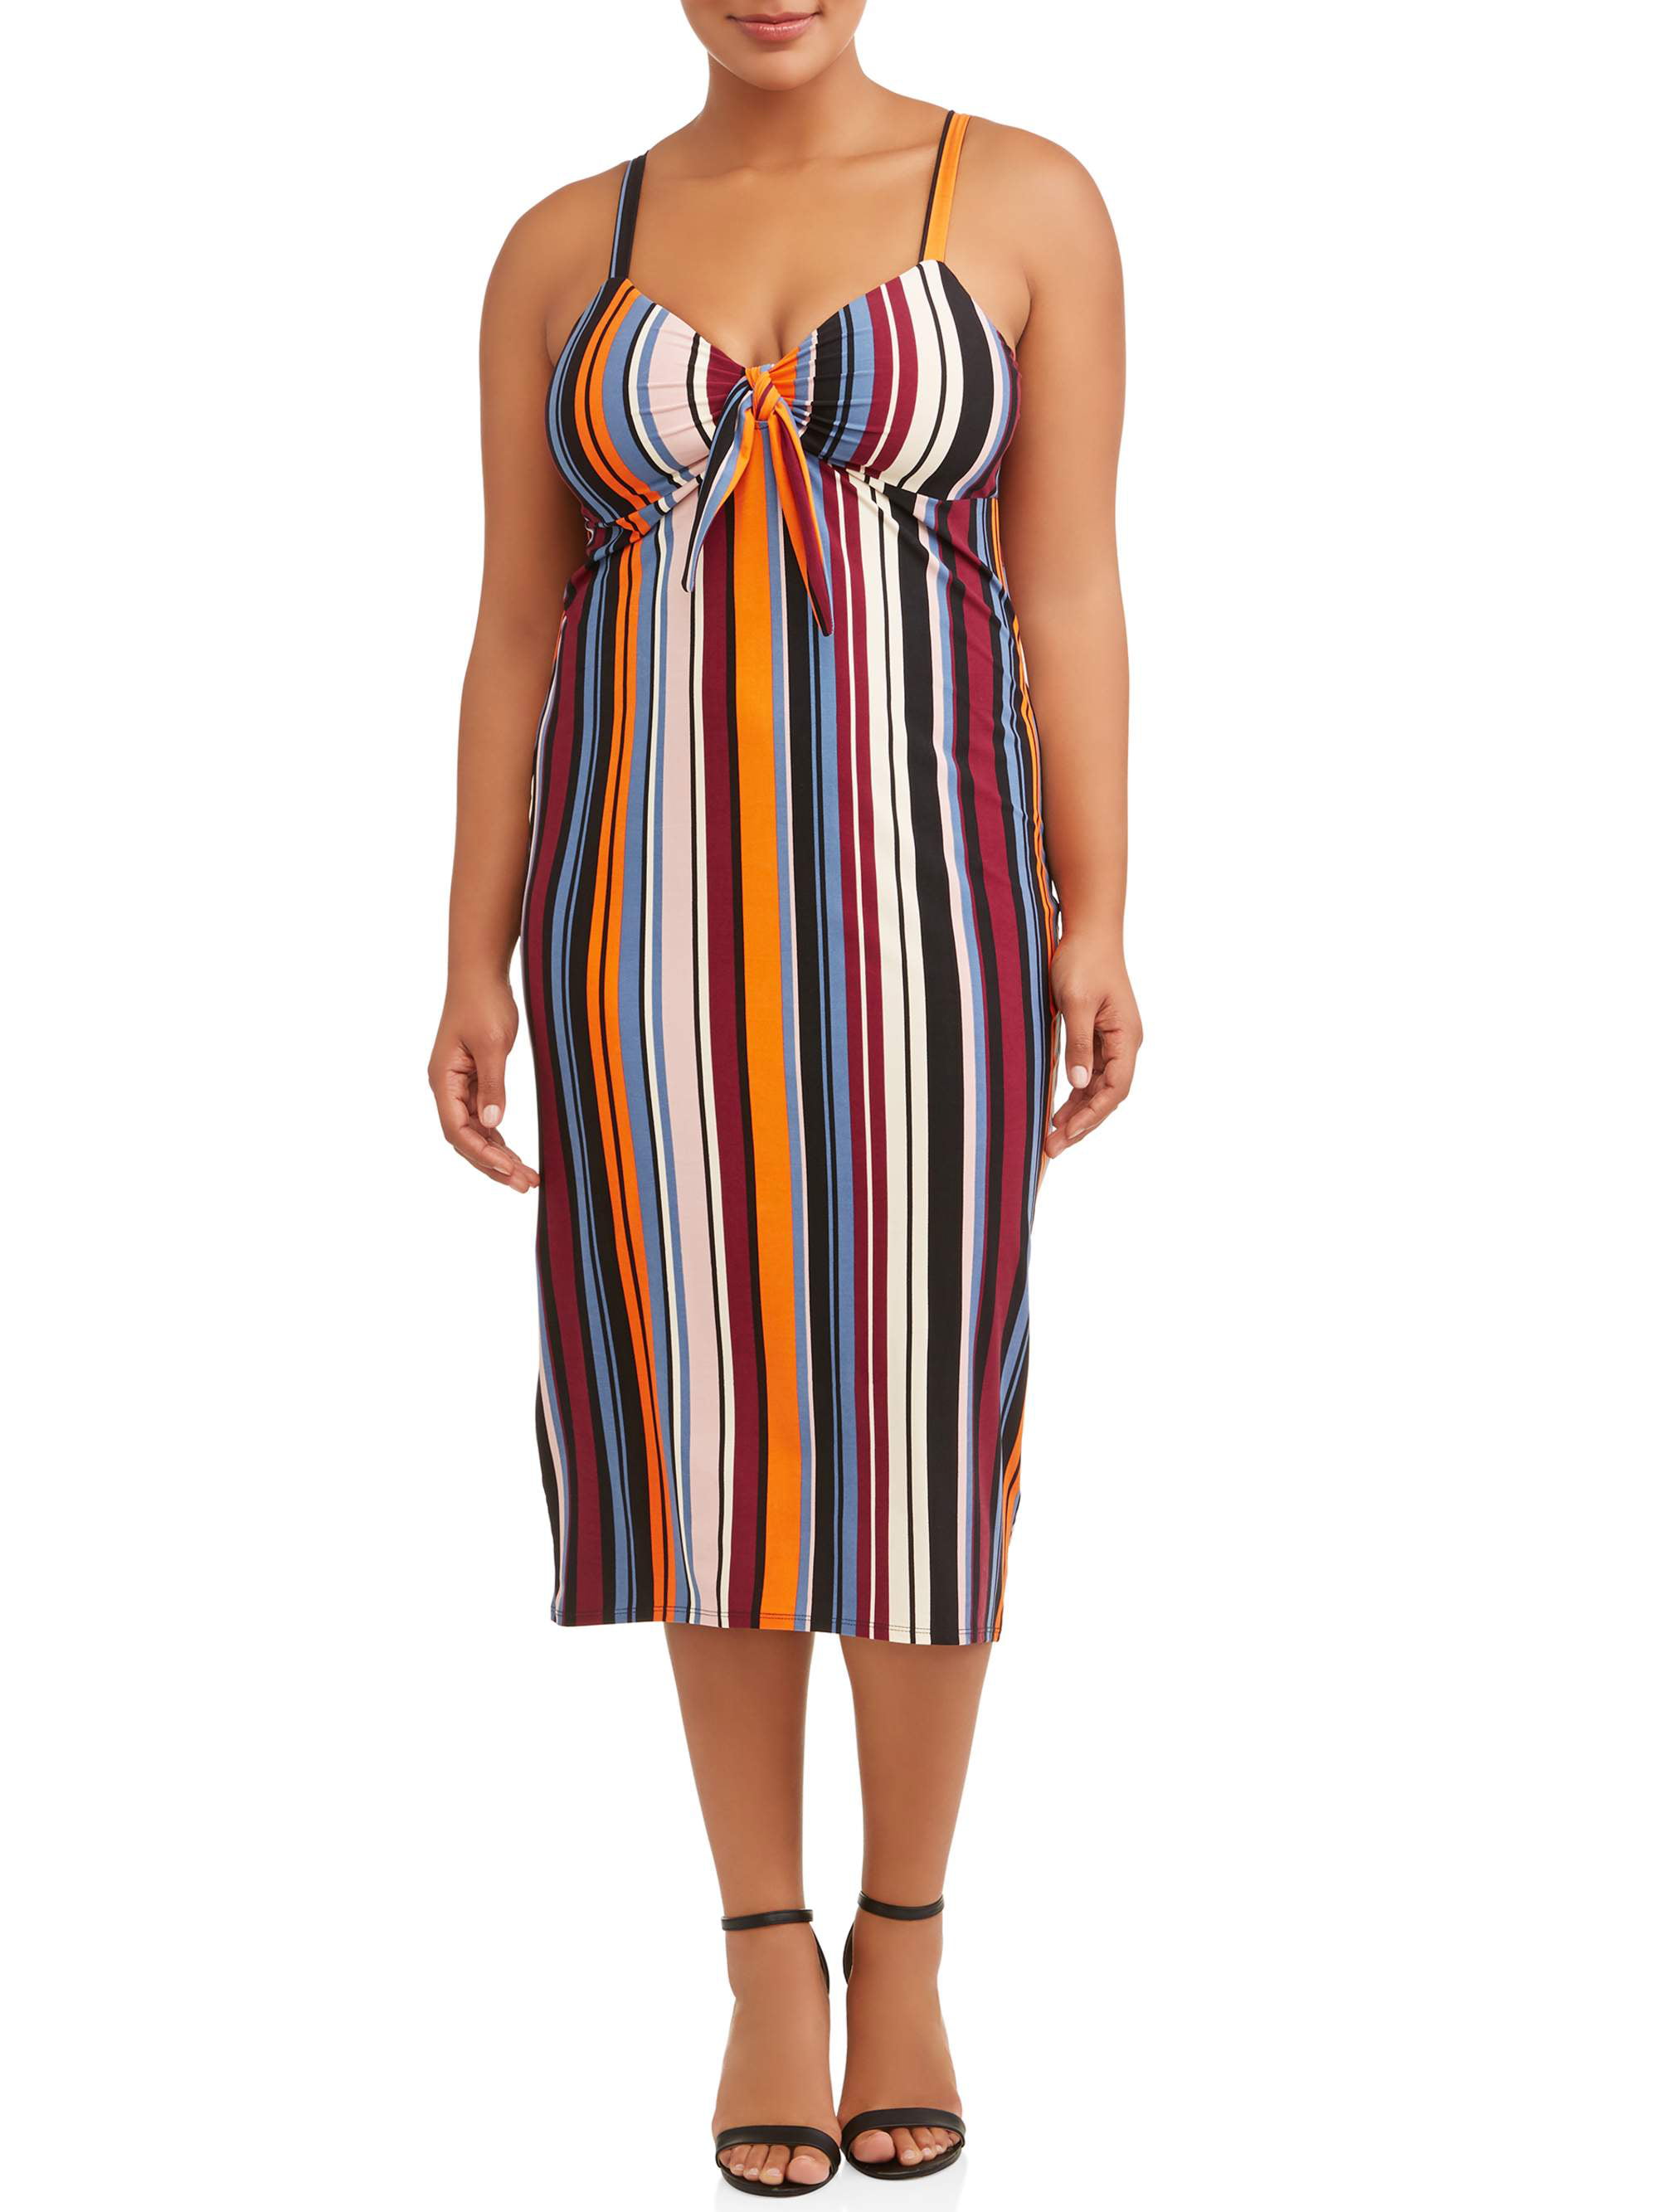 Eye Candy - Juniors' Plus Size Striped Dress with Built In Bra ...